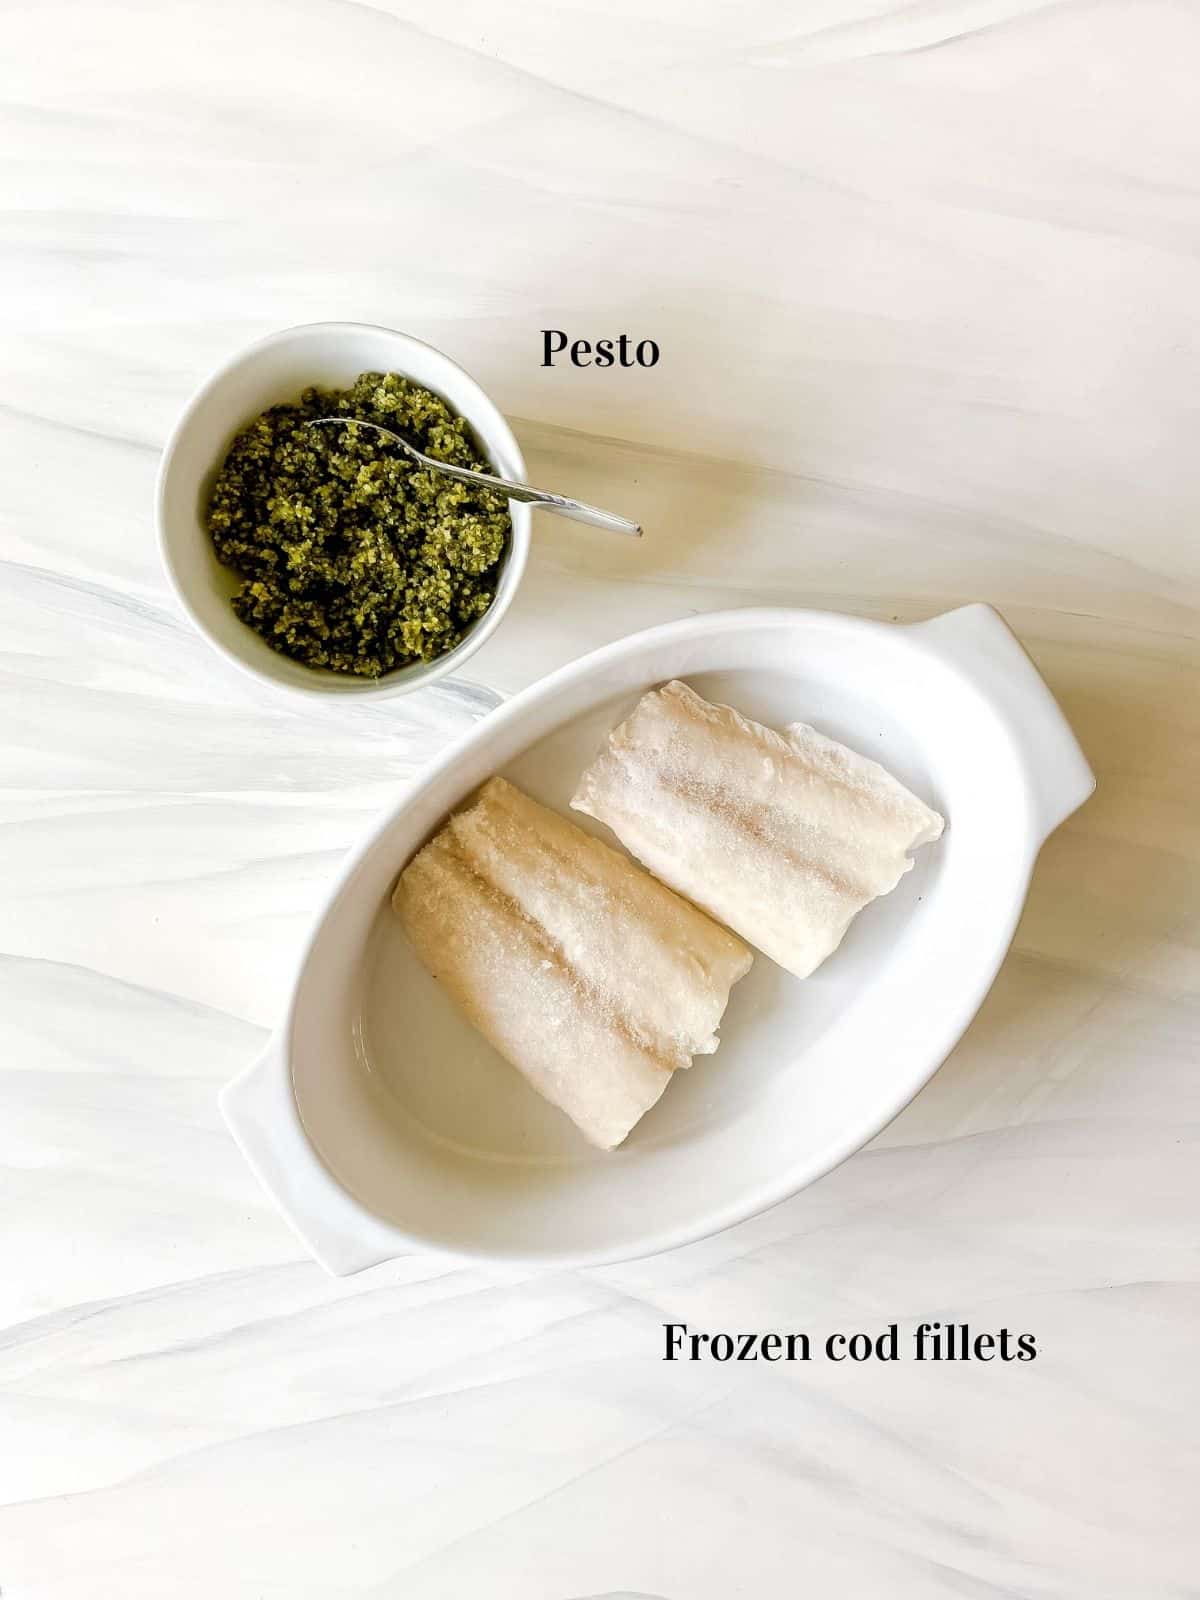 two cod fillets in a white dish next to a white bowl of pesto.